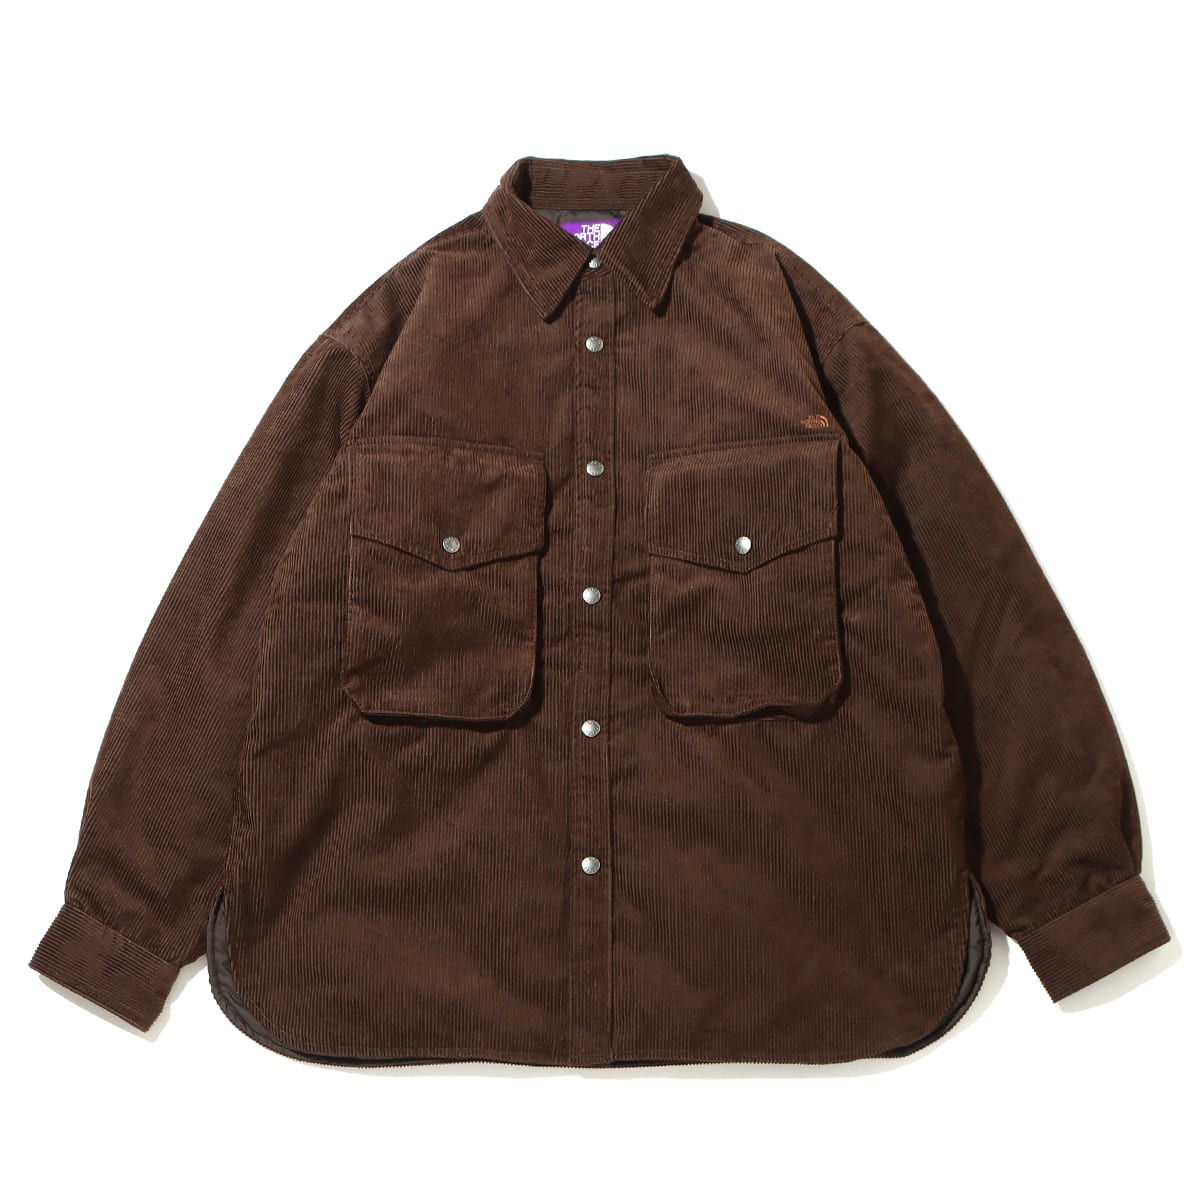 THE NORTH FACE PURPLE LABEL Corduroy Insulation Shirt Jacket Brown